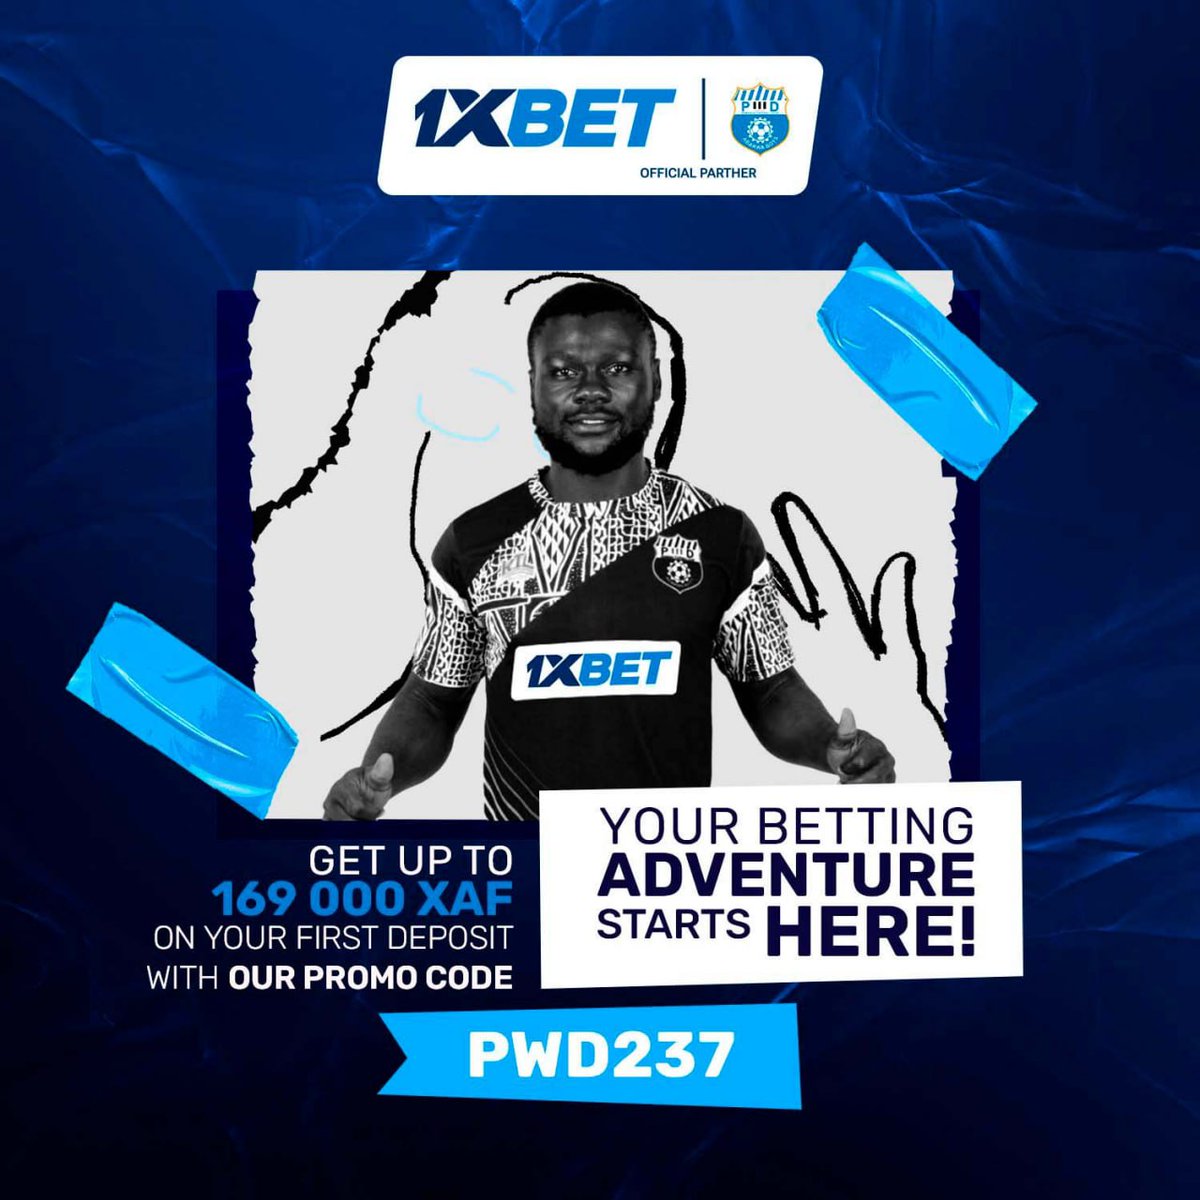 🔥Hello fans! Our sponsor @1xbetcameroon is in touch! 🌟 Been an epic journey as their partner! Stay tuned for exclusive promos & offers! Remember to use promo code PWD237 for max bonus on your first deposit! 💸✨ Let's keep winning together: tinyurl.com/ua2x5bn2